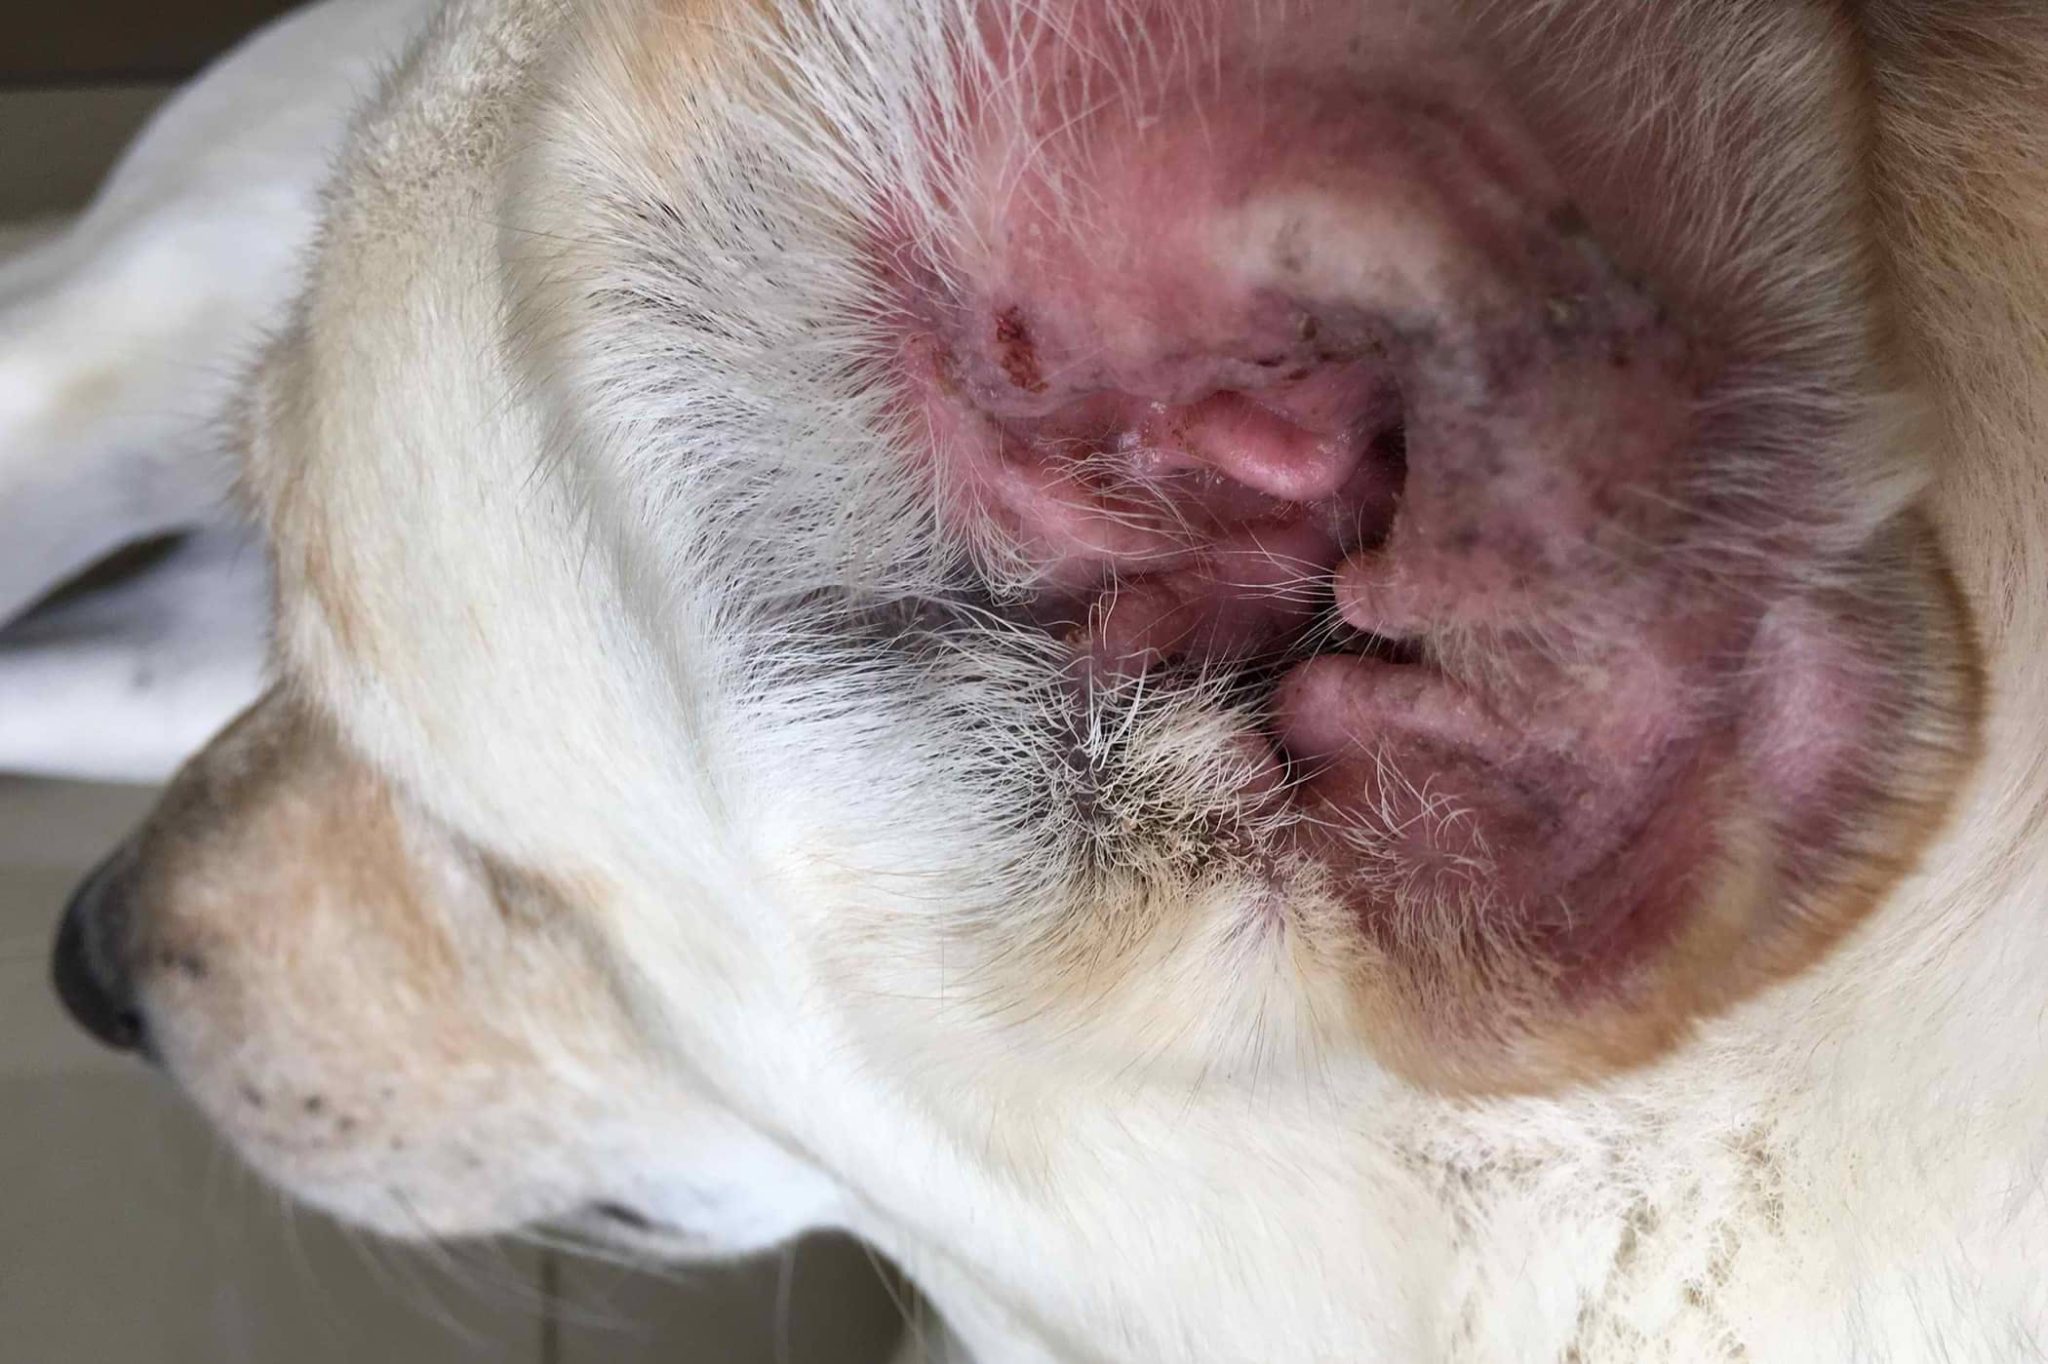 inflamed ear infection in dog